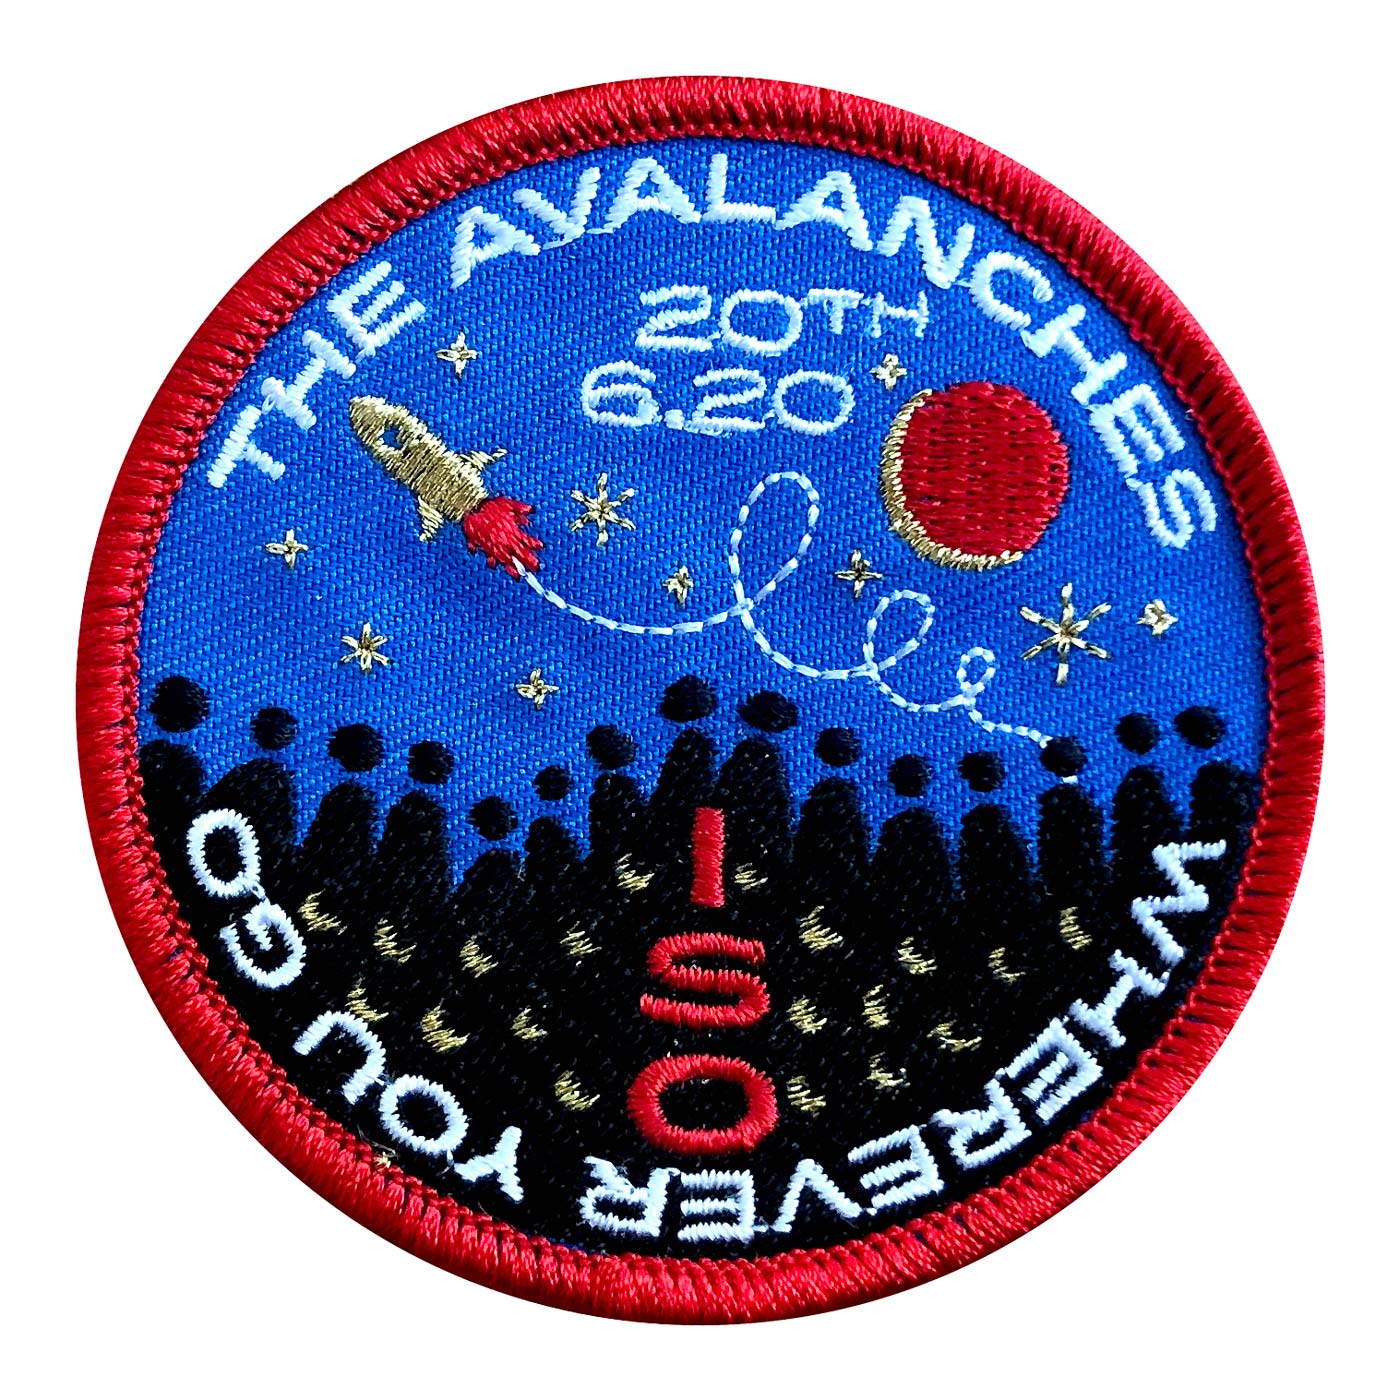 Official ISO and the Avalanches Patch Designed by David Benque